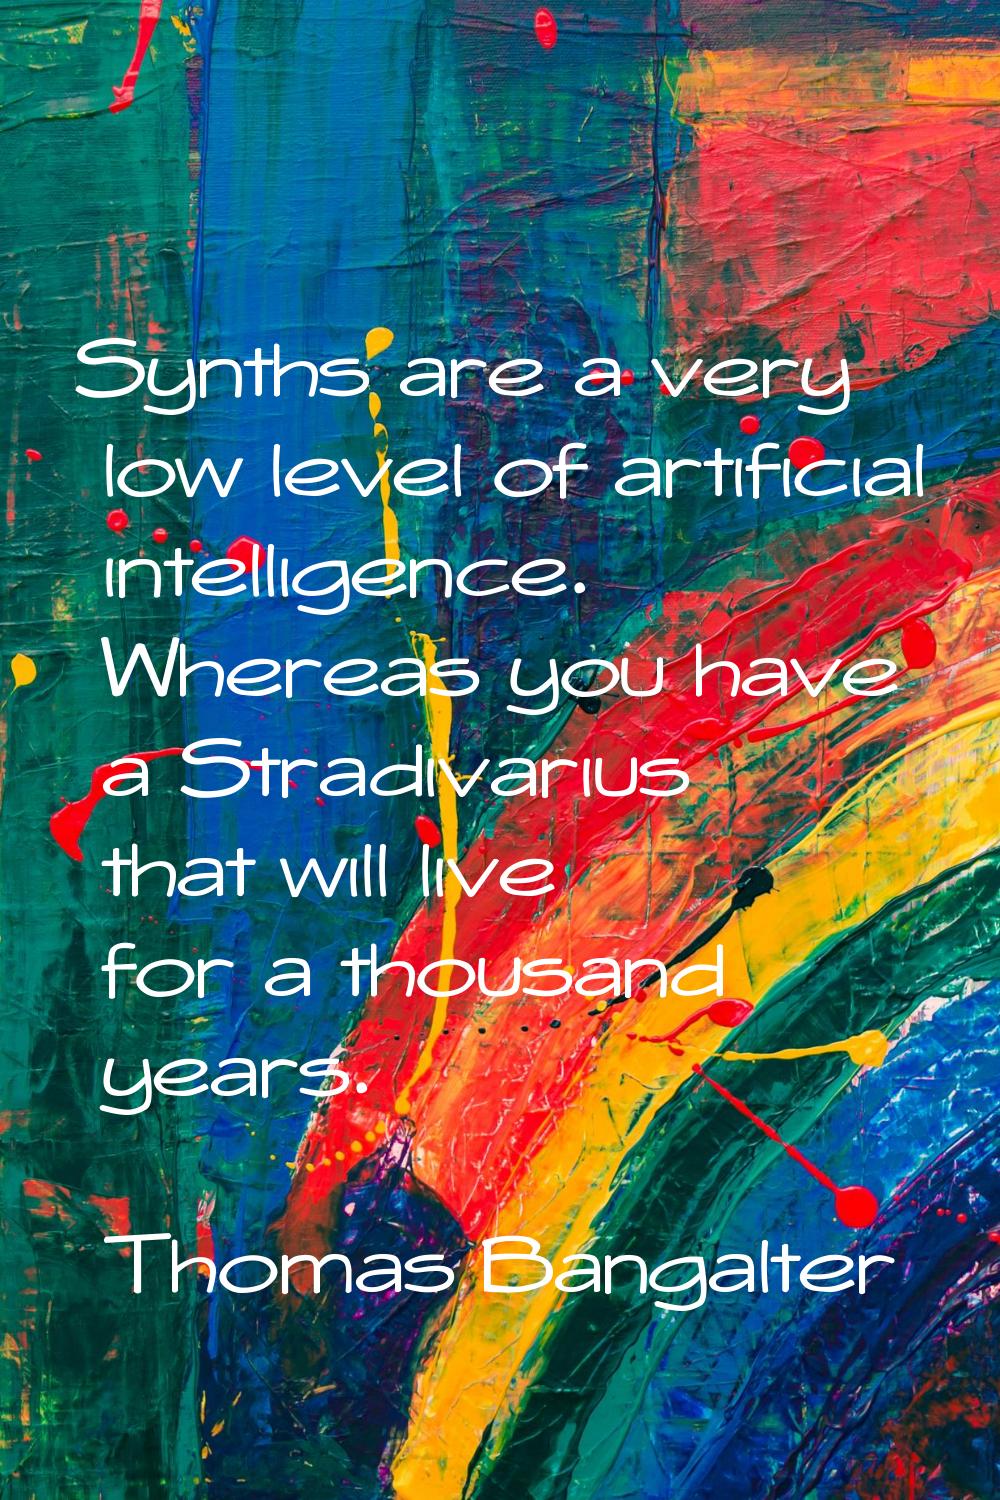 Synths are a very low level of artificial intelligence. Whereas you have a Stradivarius that will l